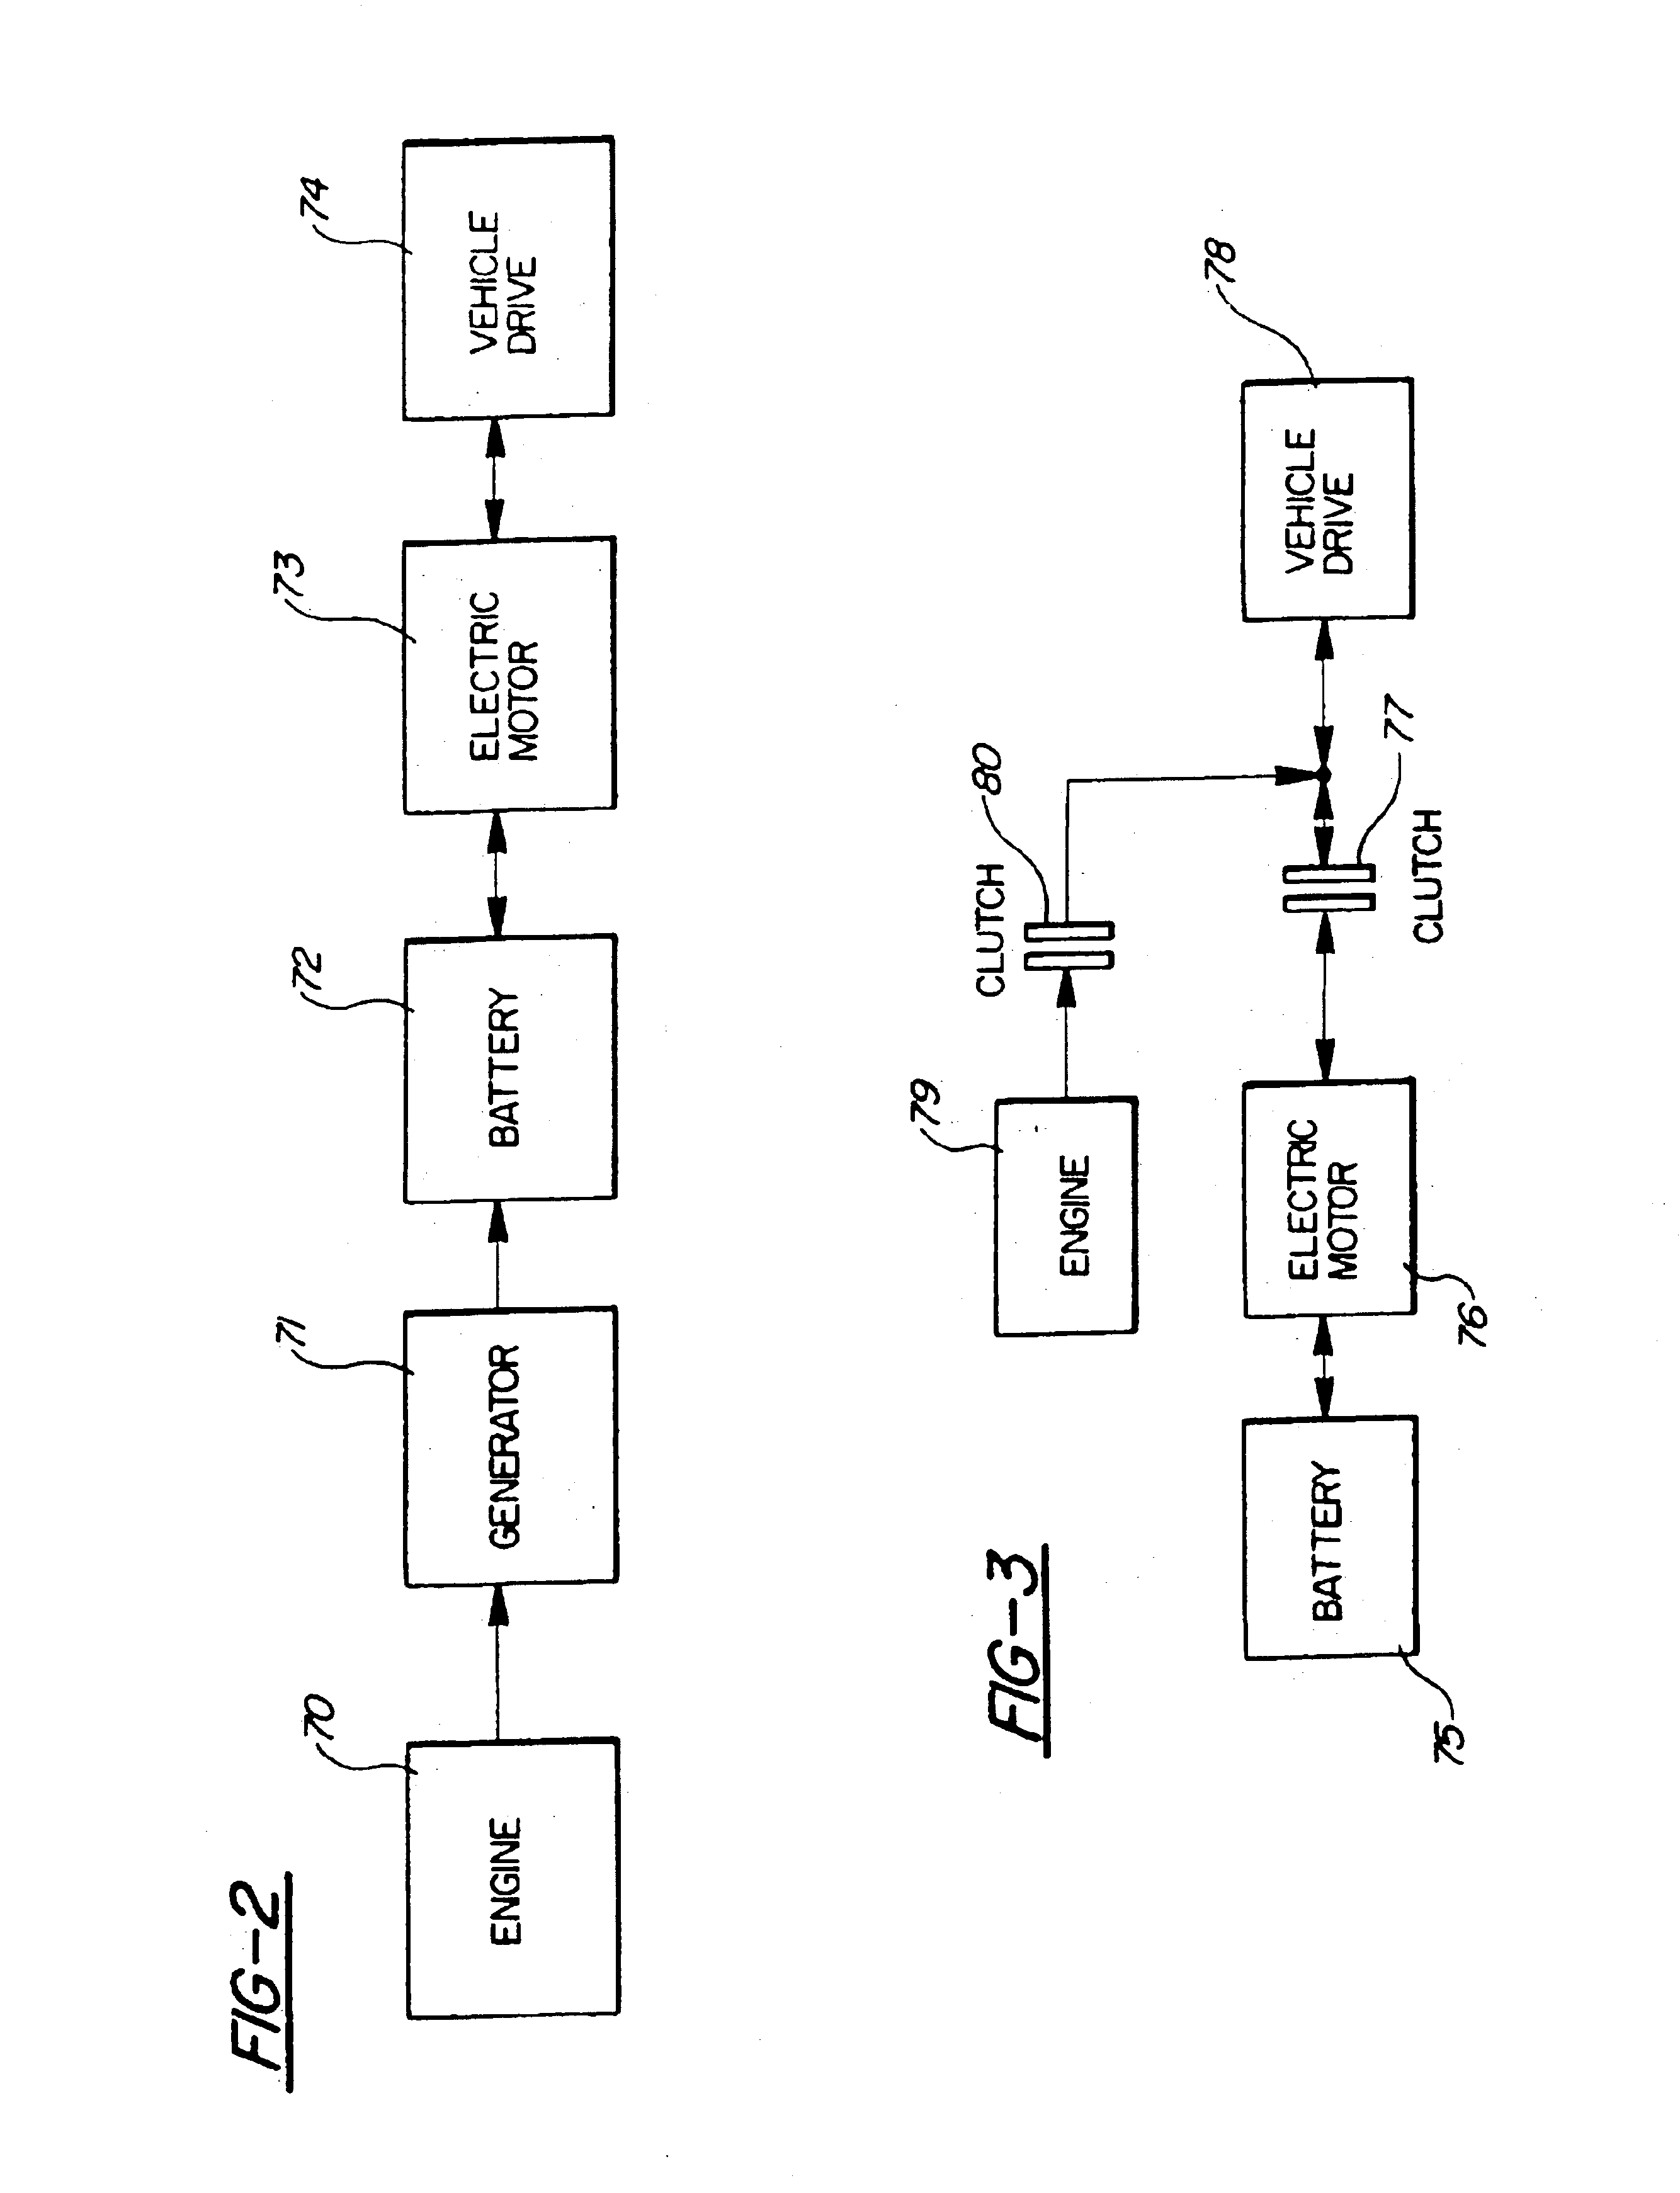 Hybrid electric vehicle incorporating an integrated propulsion system